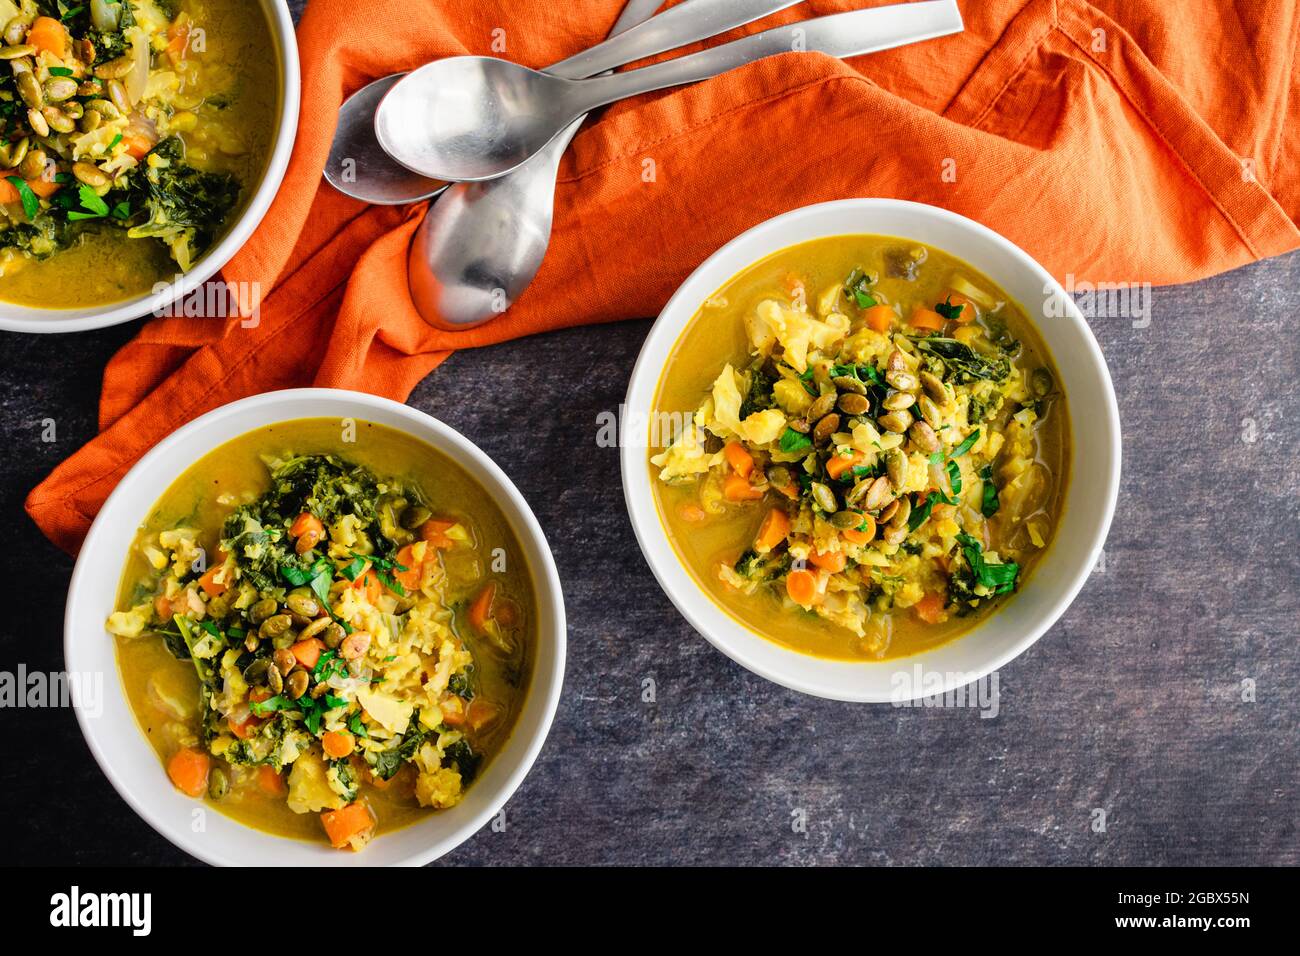 Bowls of Vegan Curried Cauliflower Rice Kale Soup: Curried vegetable soup garnished with toasted pumpkin seeds and parsley Stock Photo